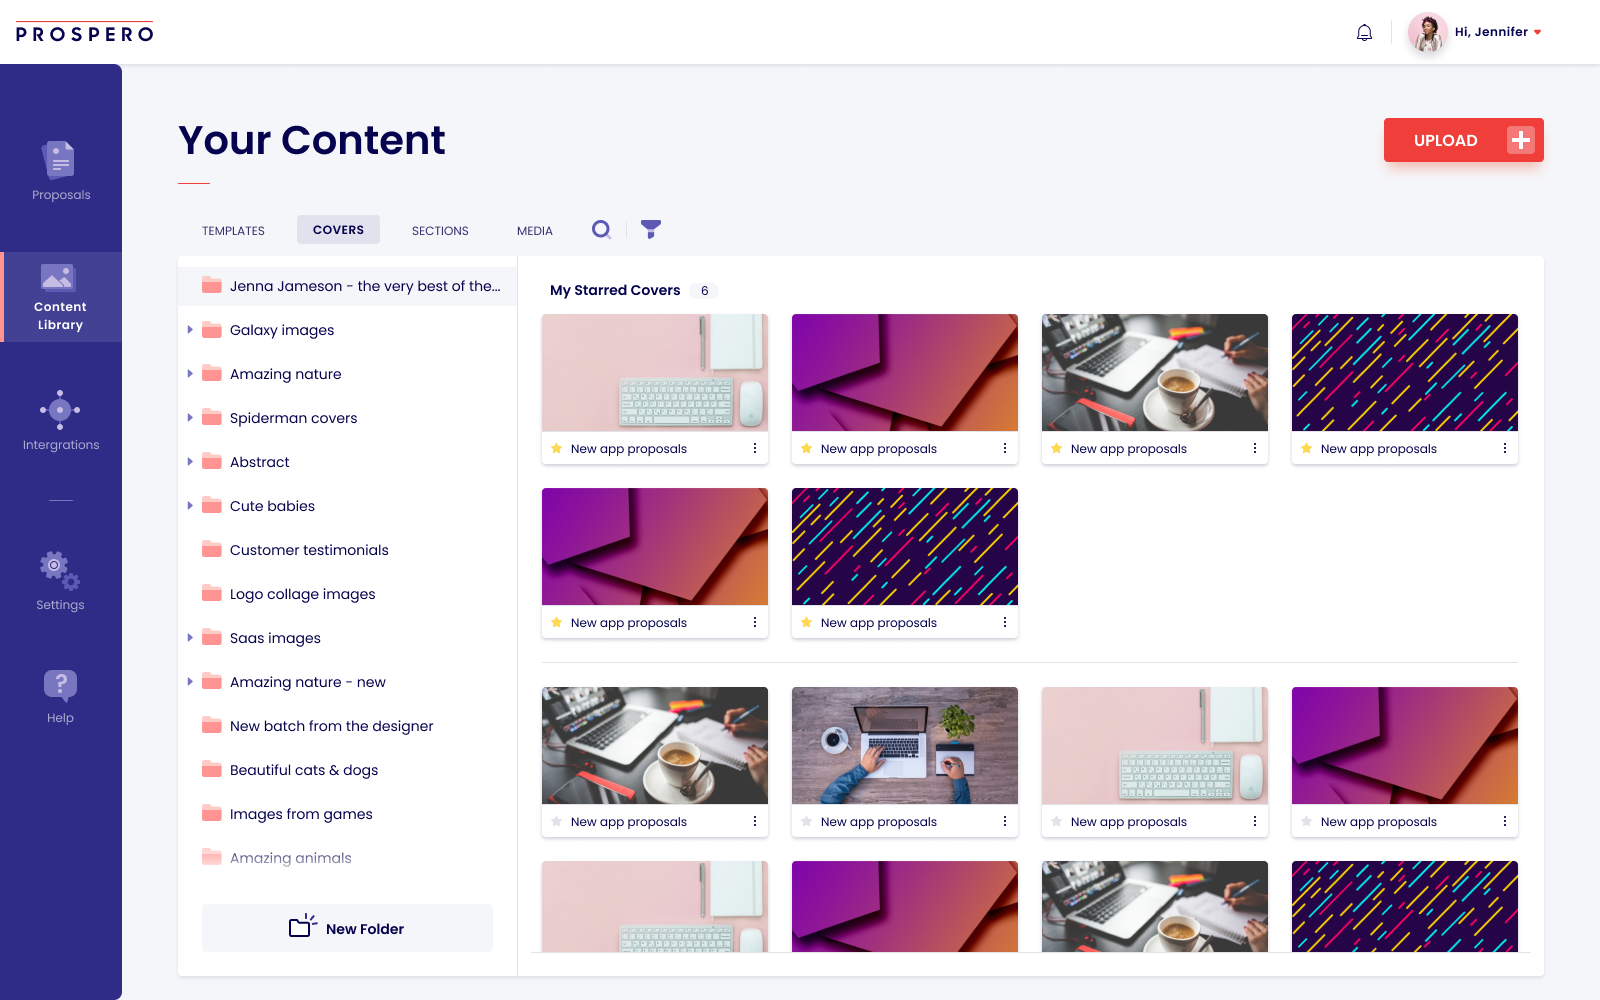 Customize your proposals using different elements from our content library